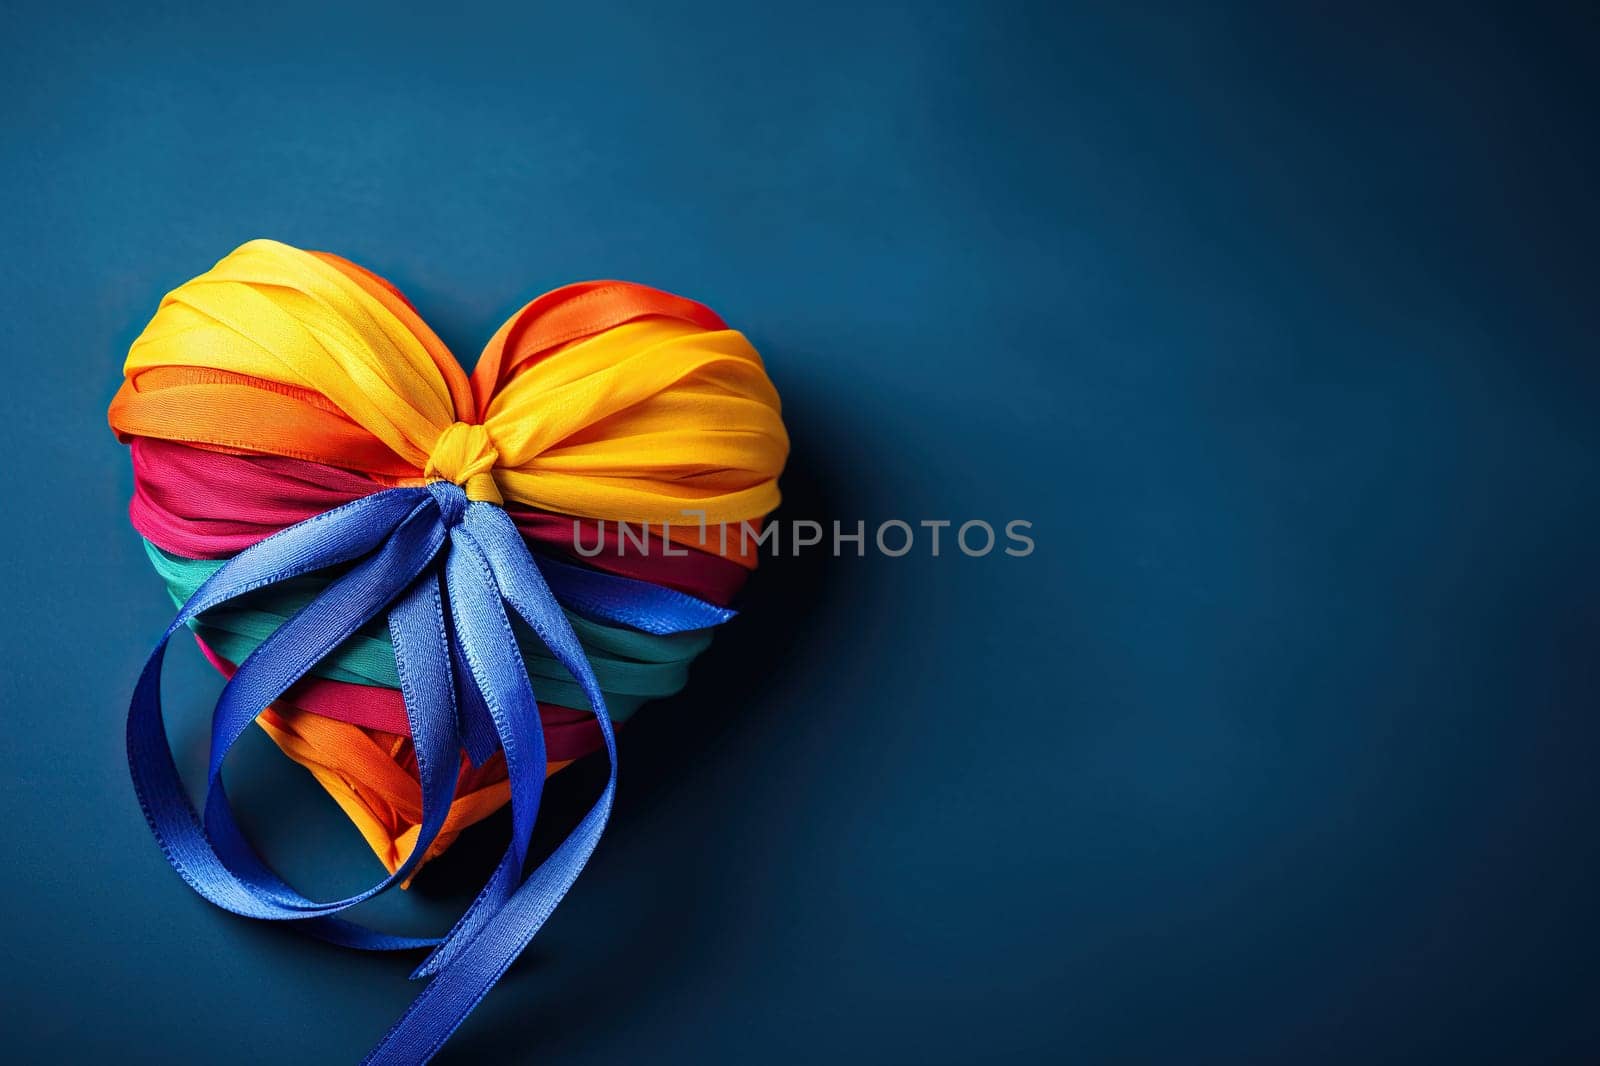 Multi-colored ribbons collected in the shape of a heart on a blue background.